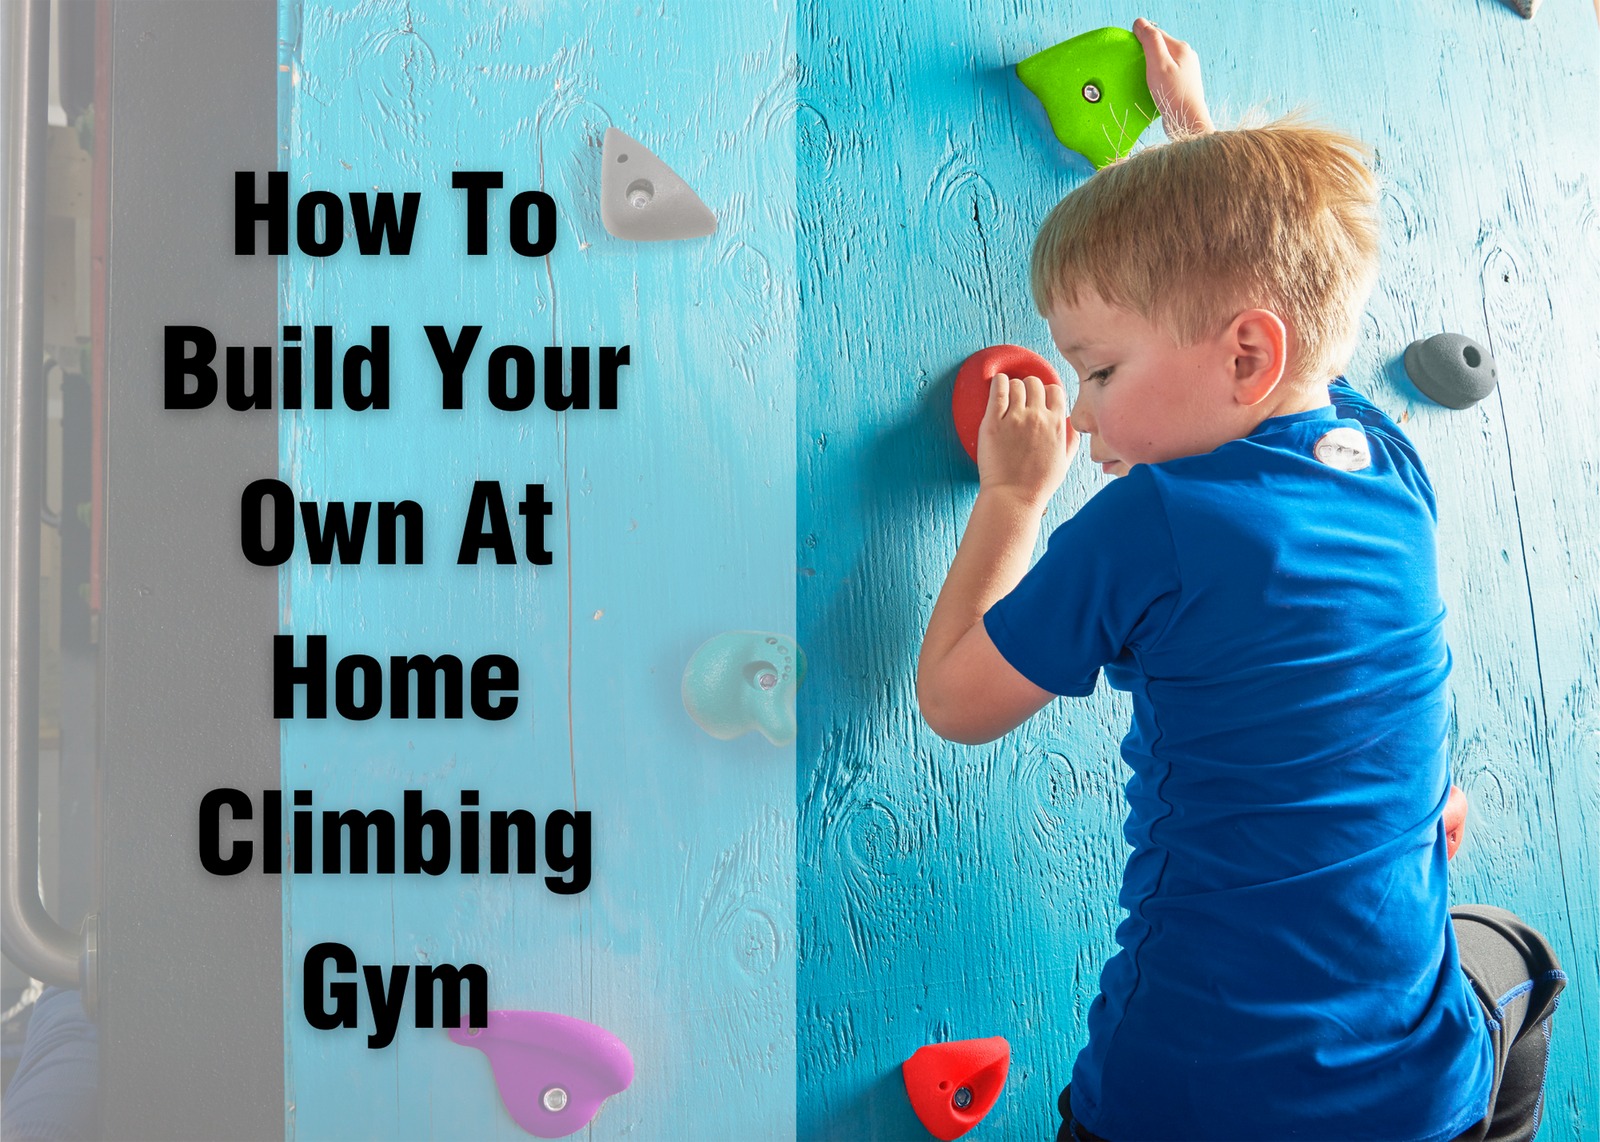 How To Build Your Own At Home Climbing Gym